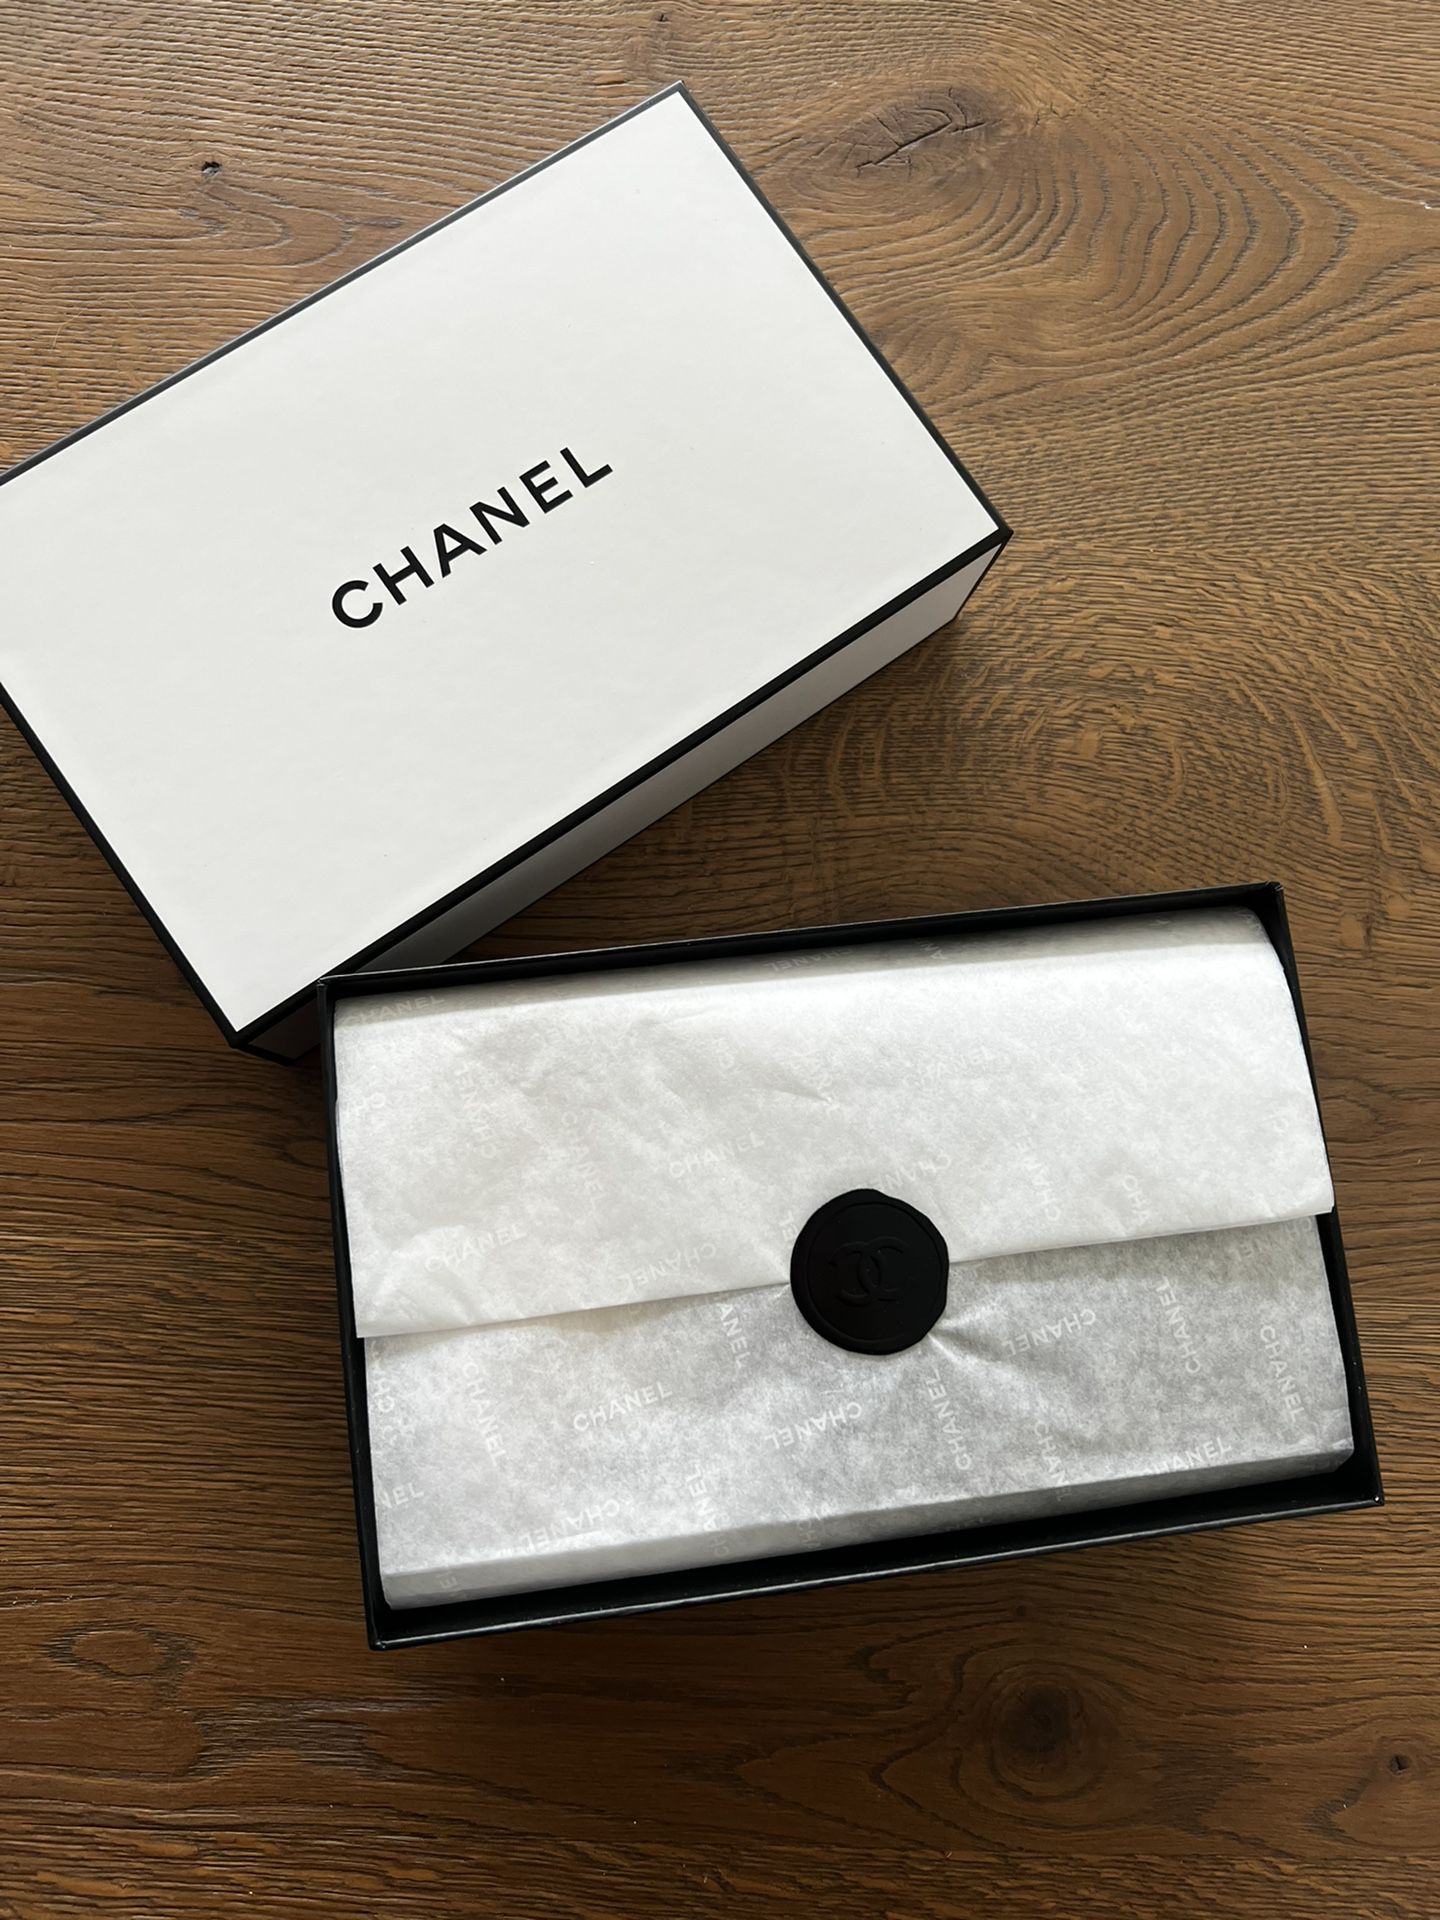 Chanel Wrapping Paper From Macy's Store for Sale in Chesapeake, VA - OfferUp